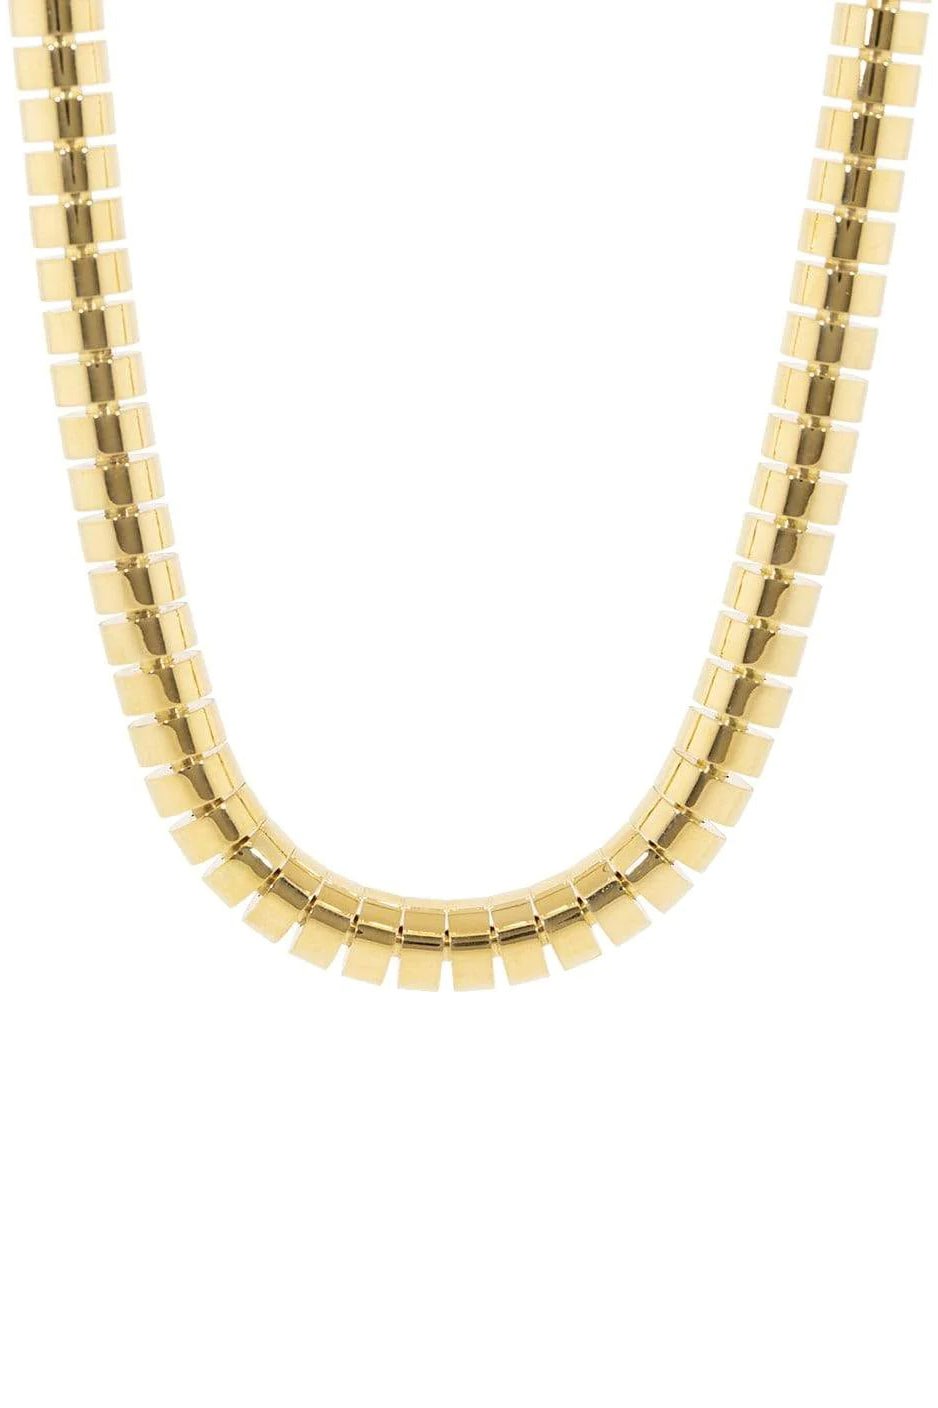 SIDNEY GARBER-Yellow Gold Ophelia Necklace 28IN-YELLOW GOLD